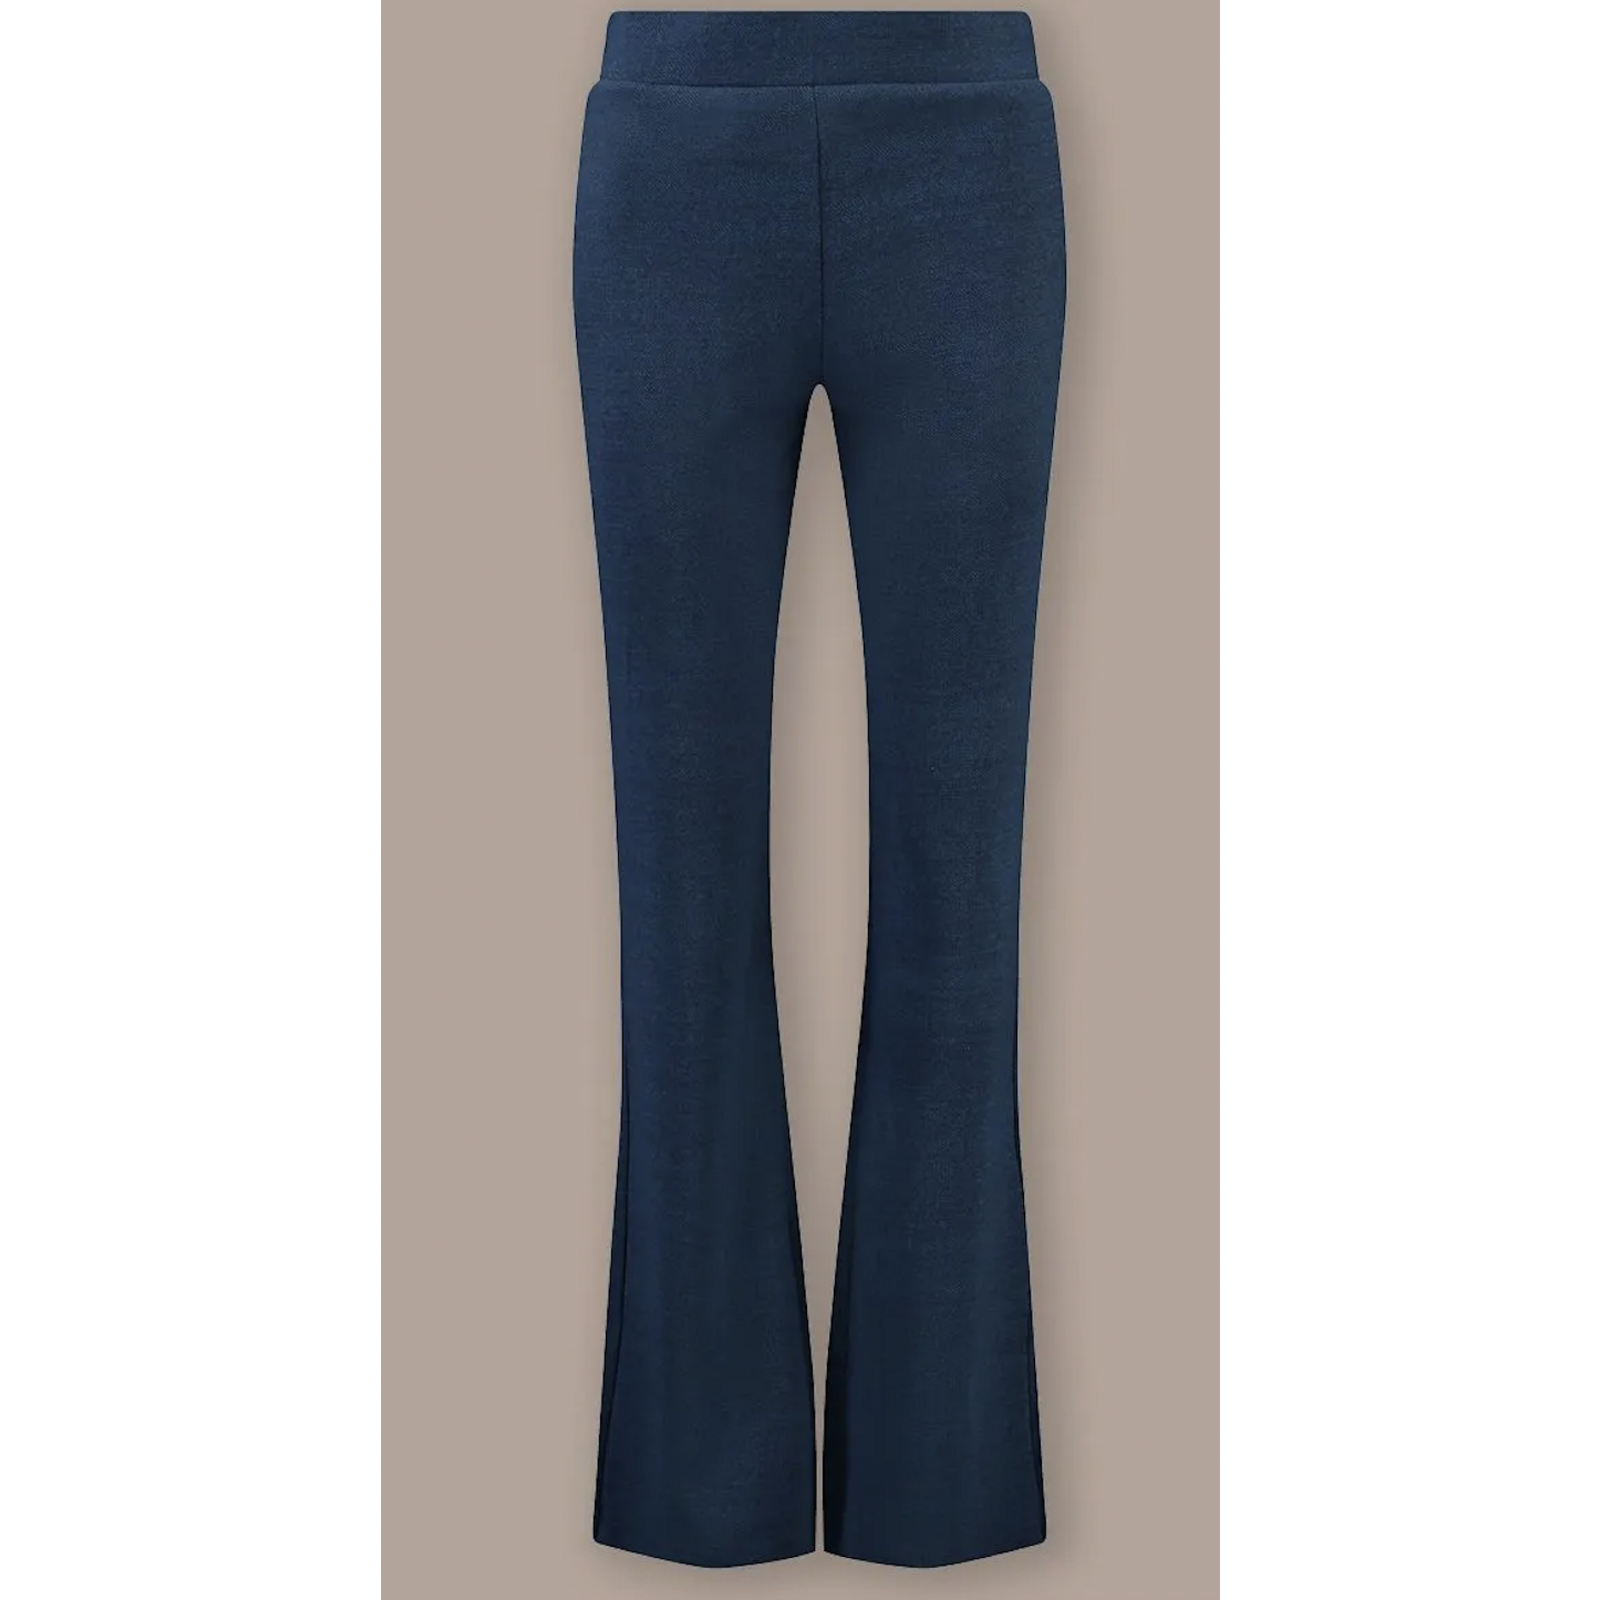 Tante Betsy Remi Flared Pants Navy